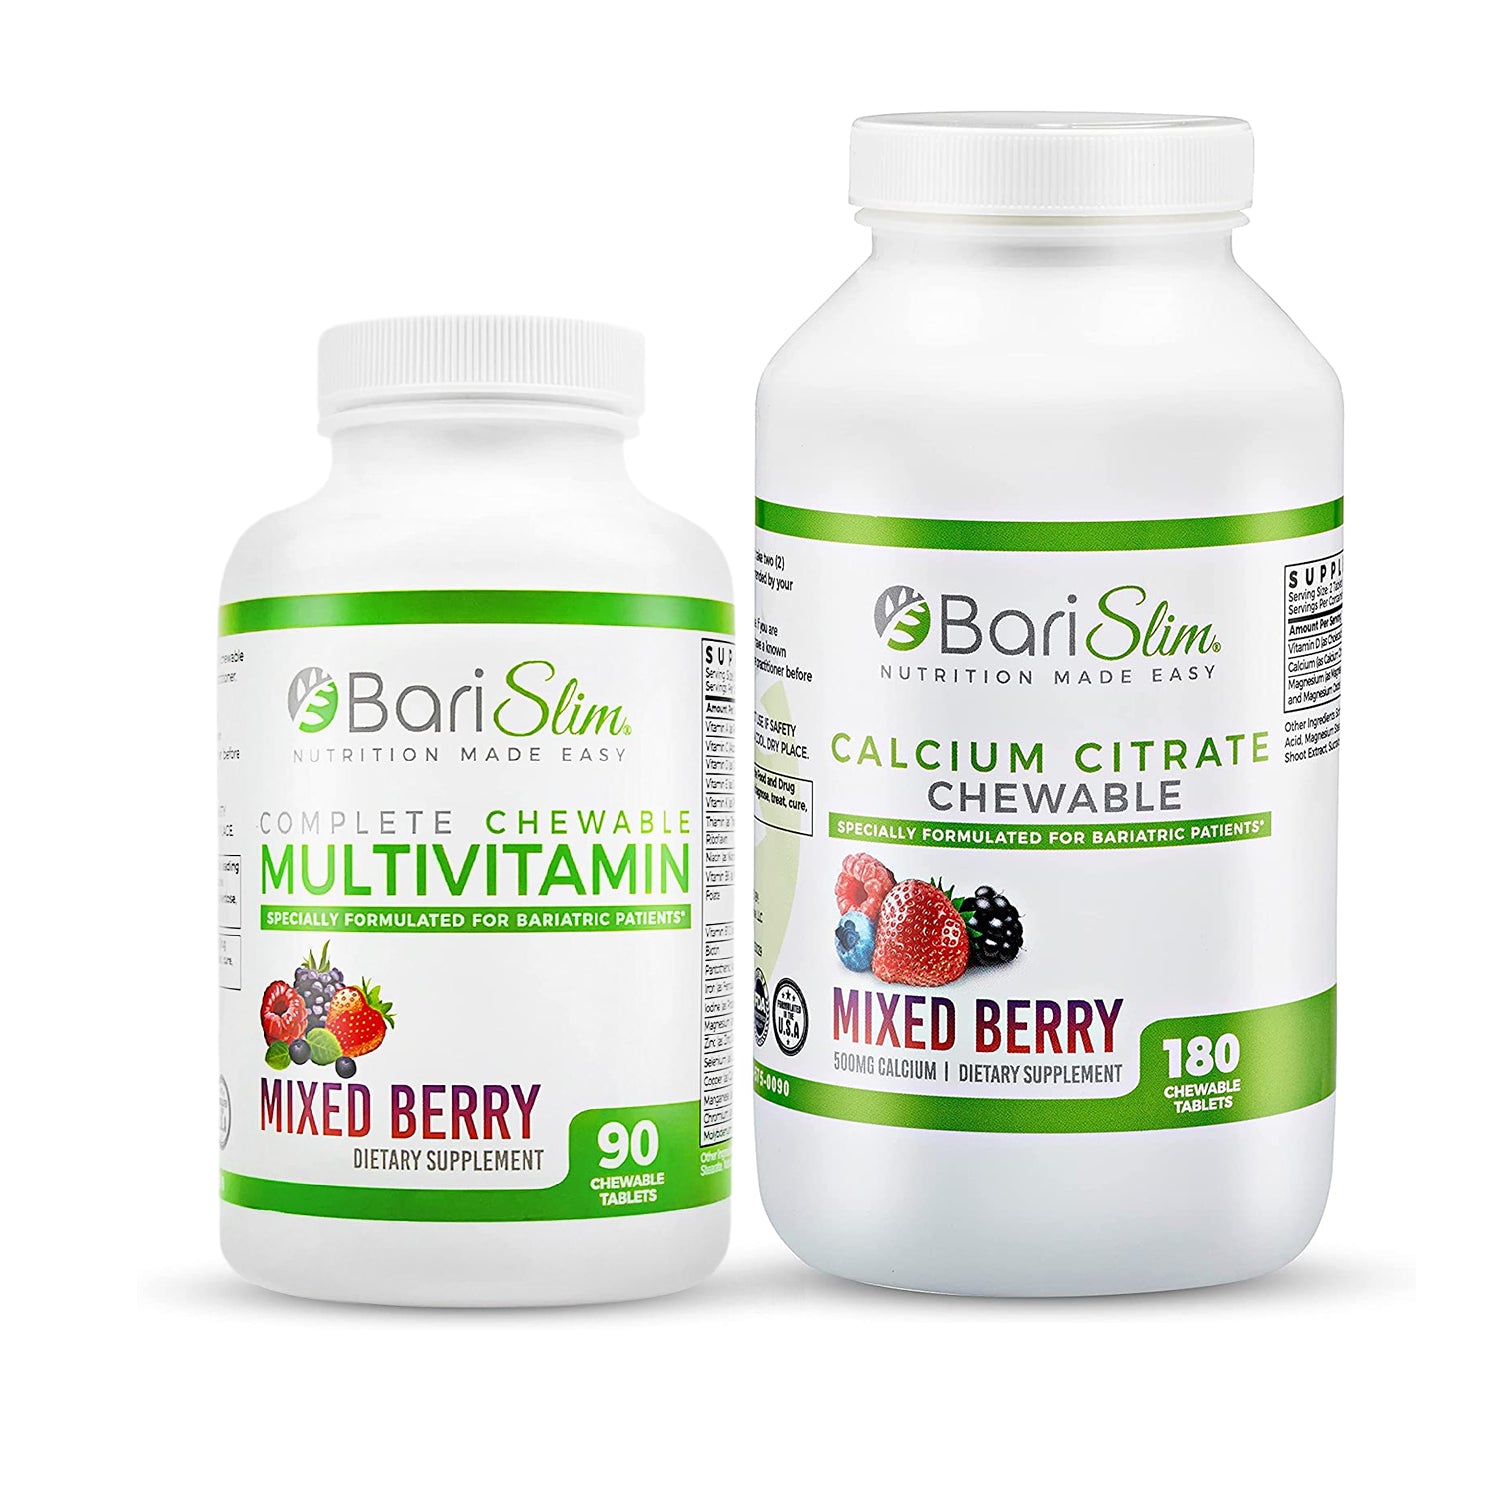 Complete Chewable multivitamin with calcium citrate combo- mixed berry flavor